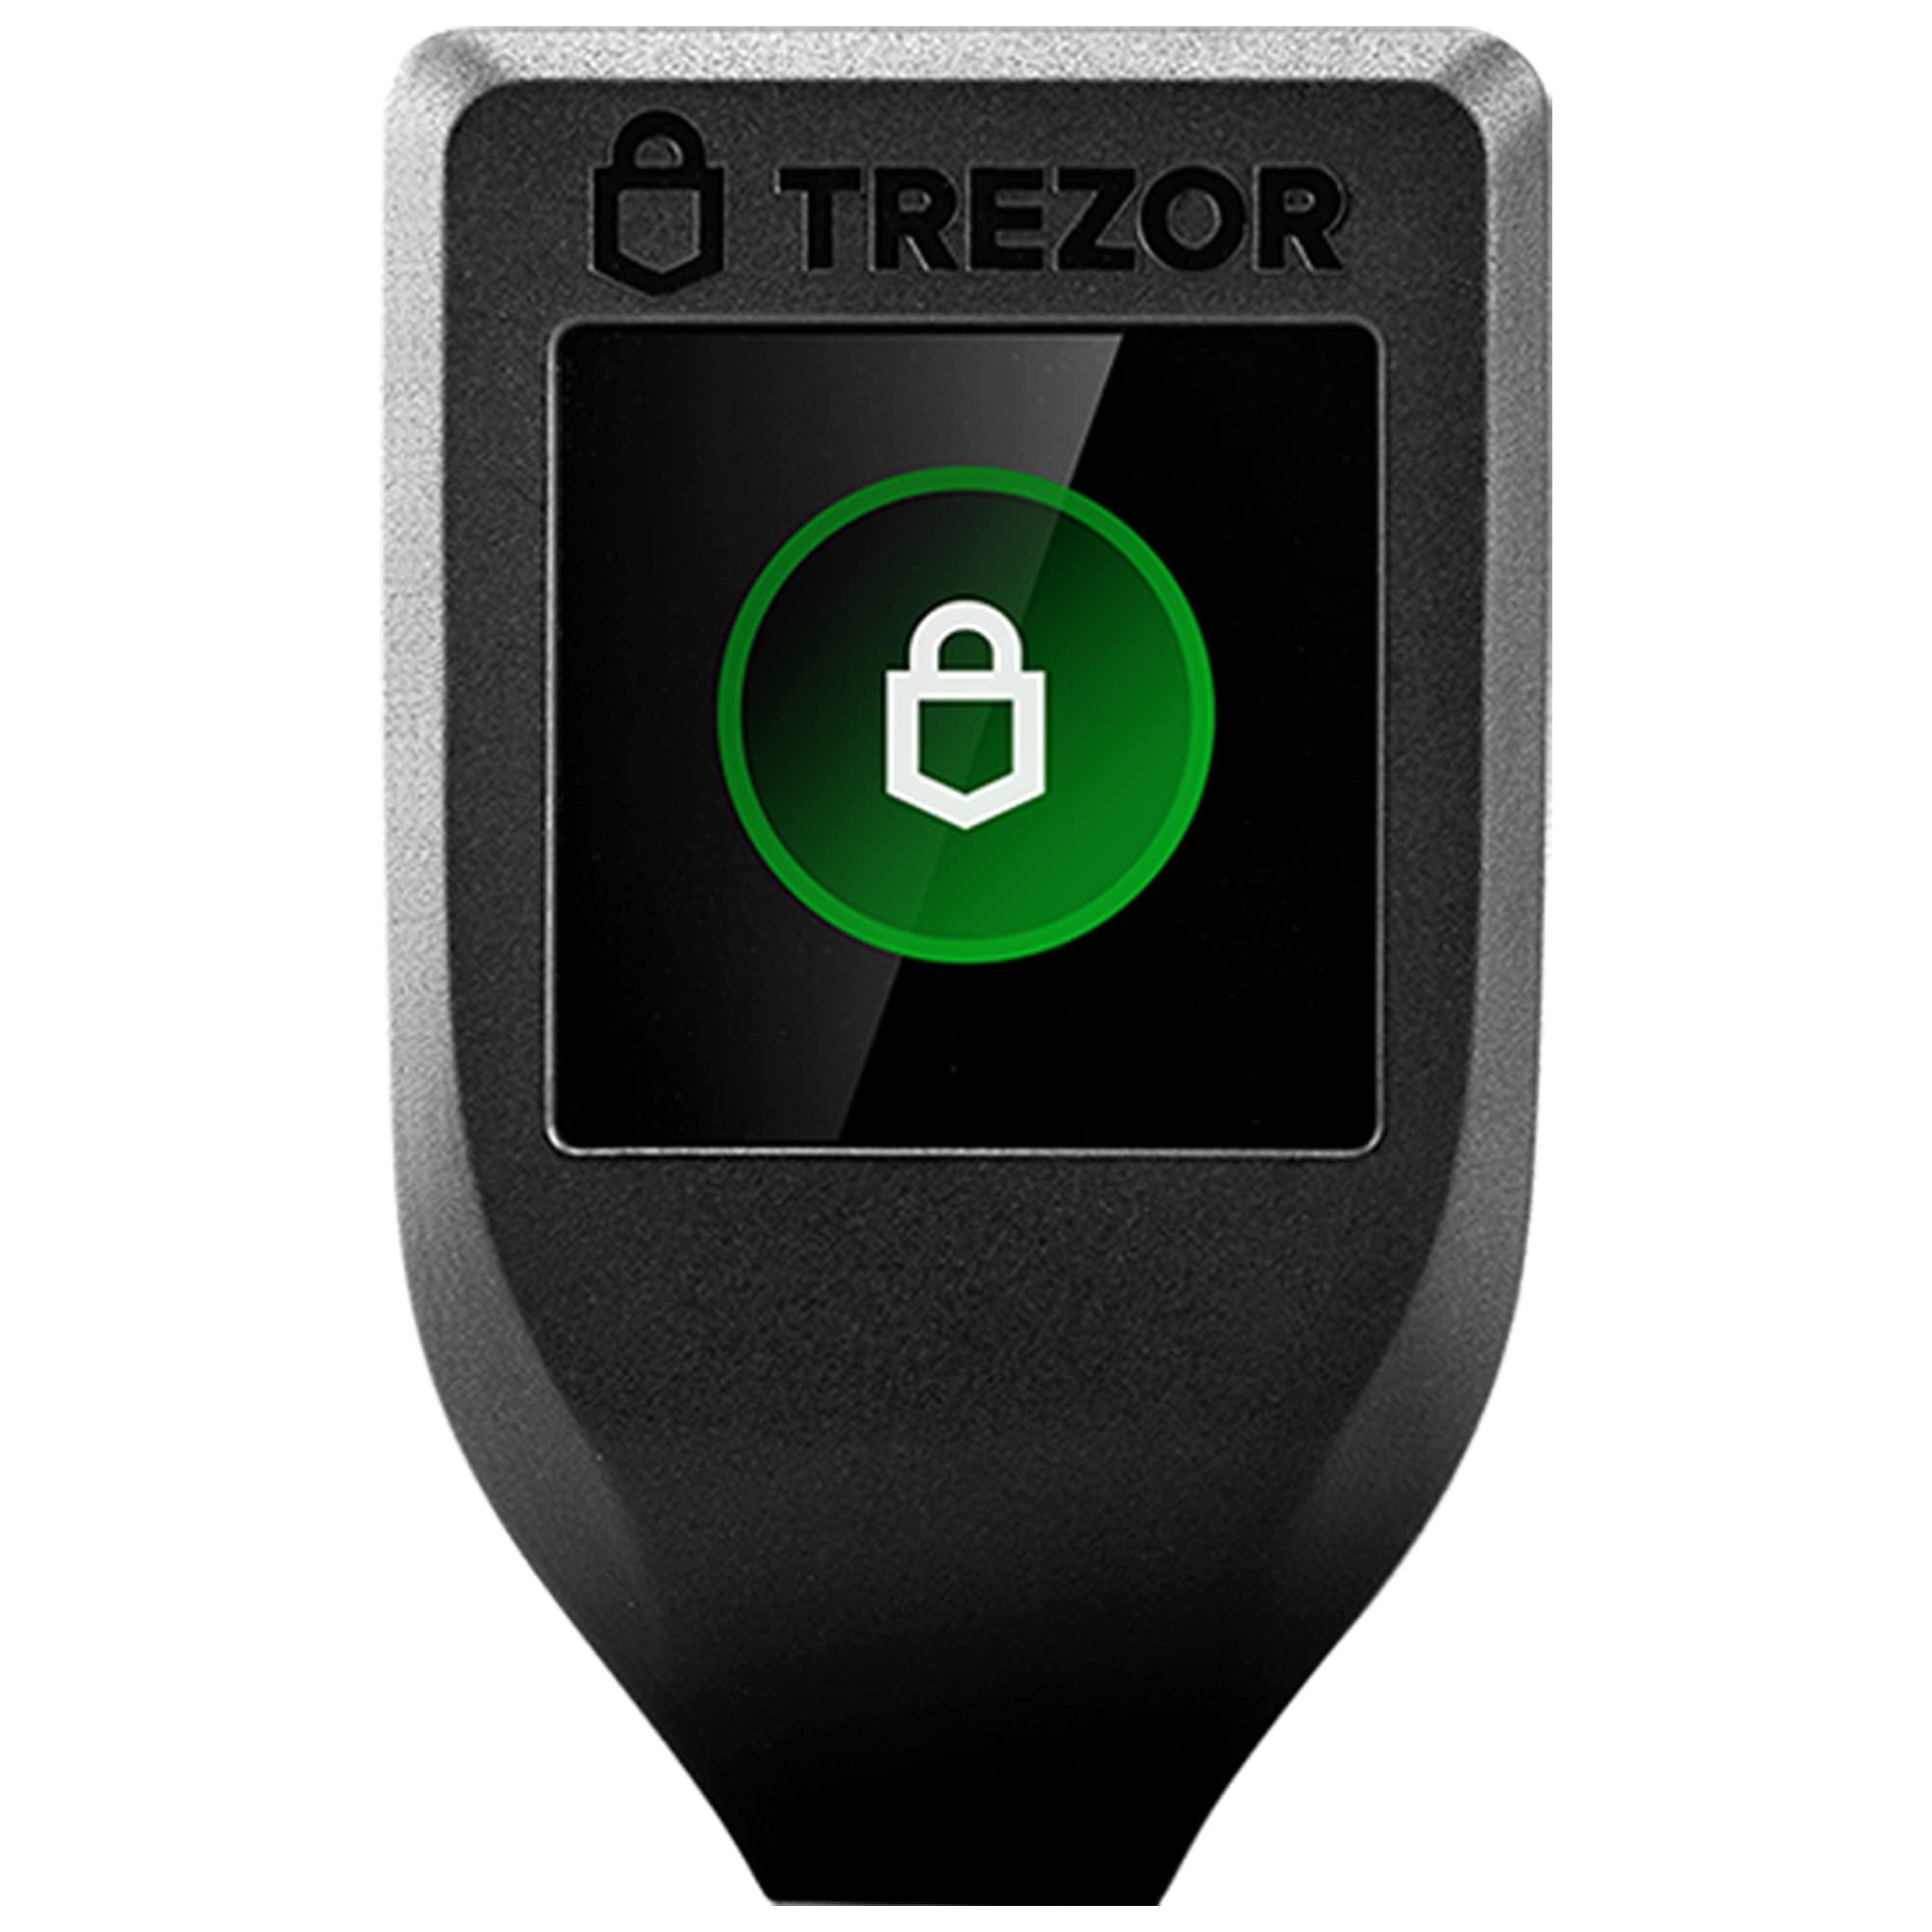 Silicon Power trezor model t - next generation crypto hardware wallet with lcd color touchscreen and usb-c, store your bitcoin, ethereum, e